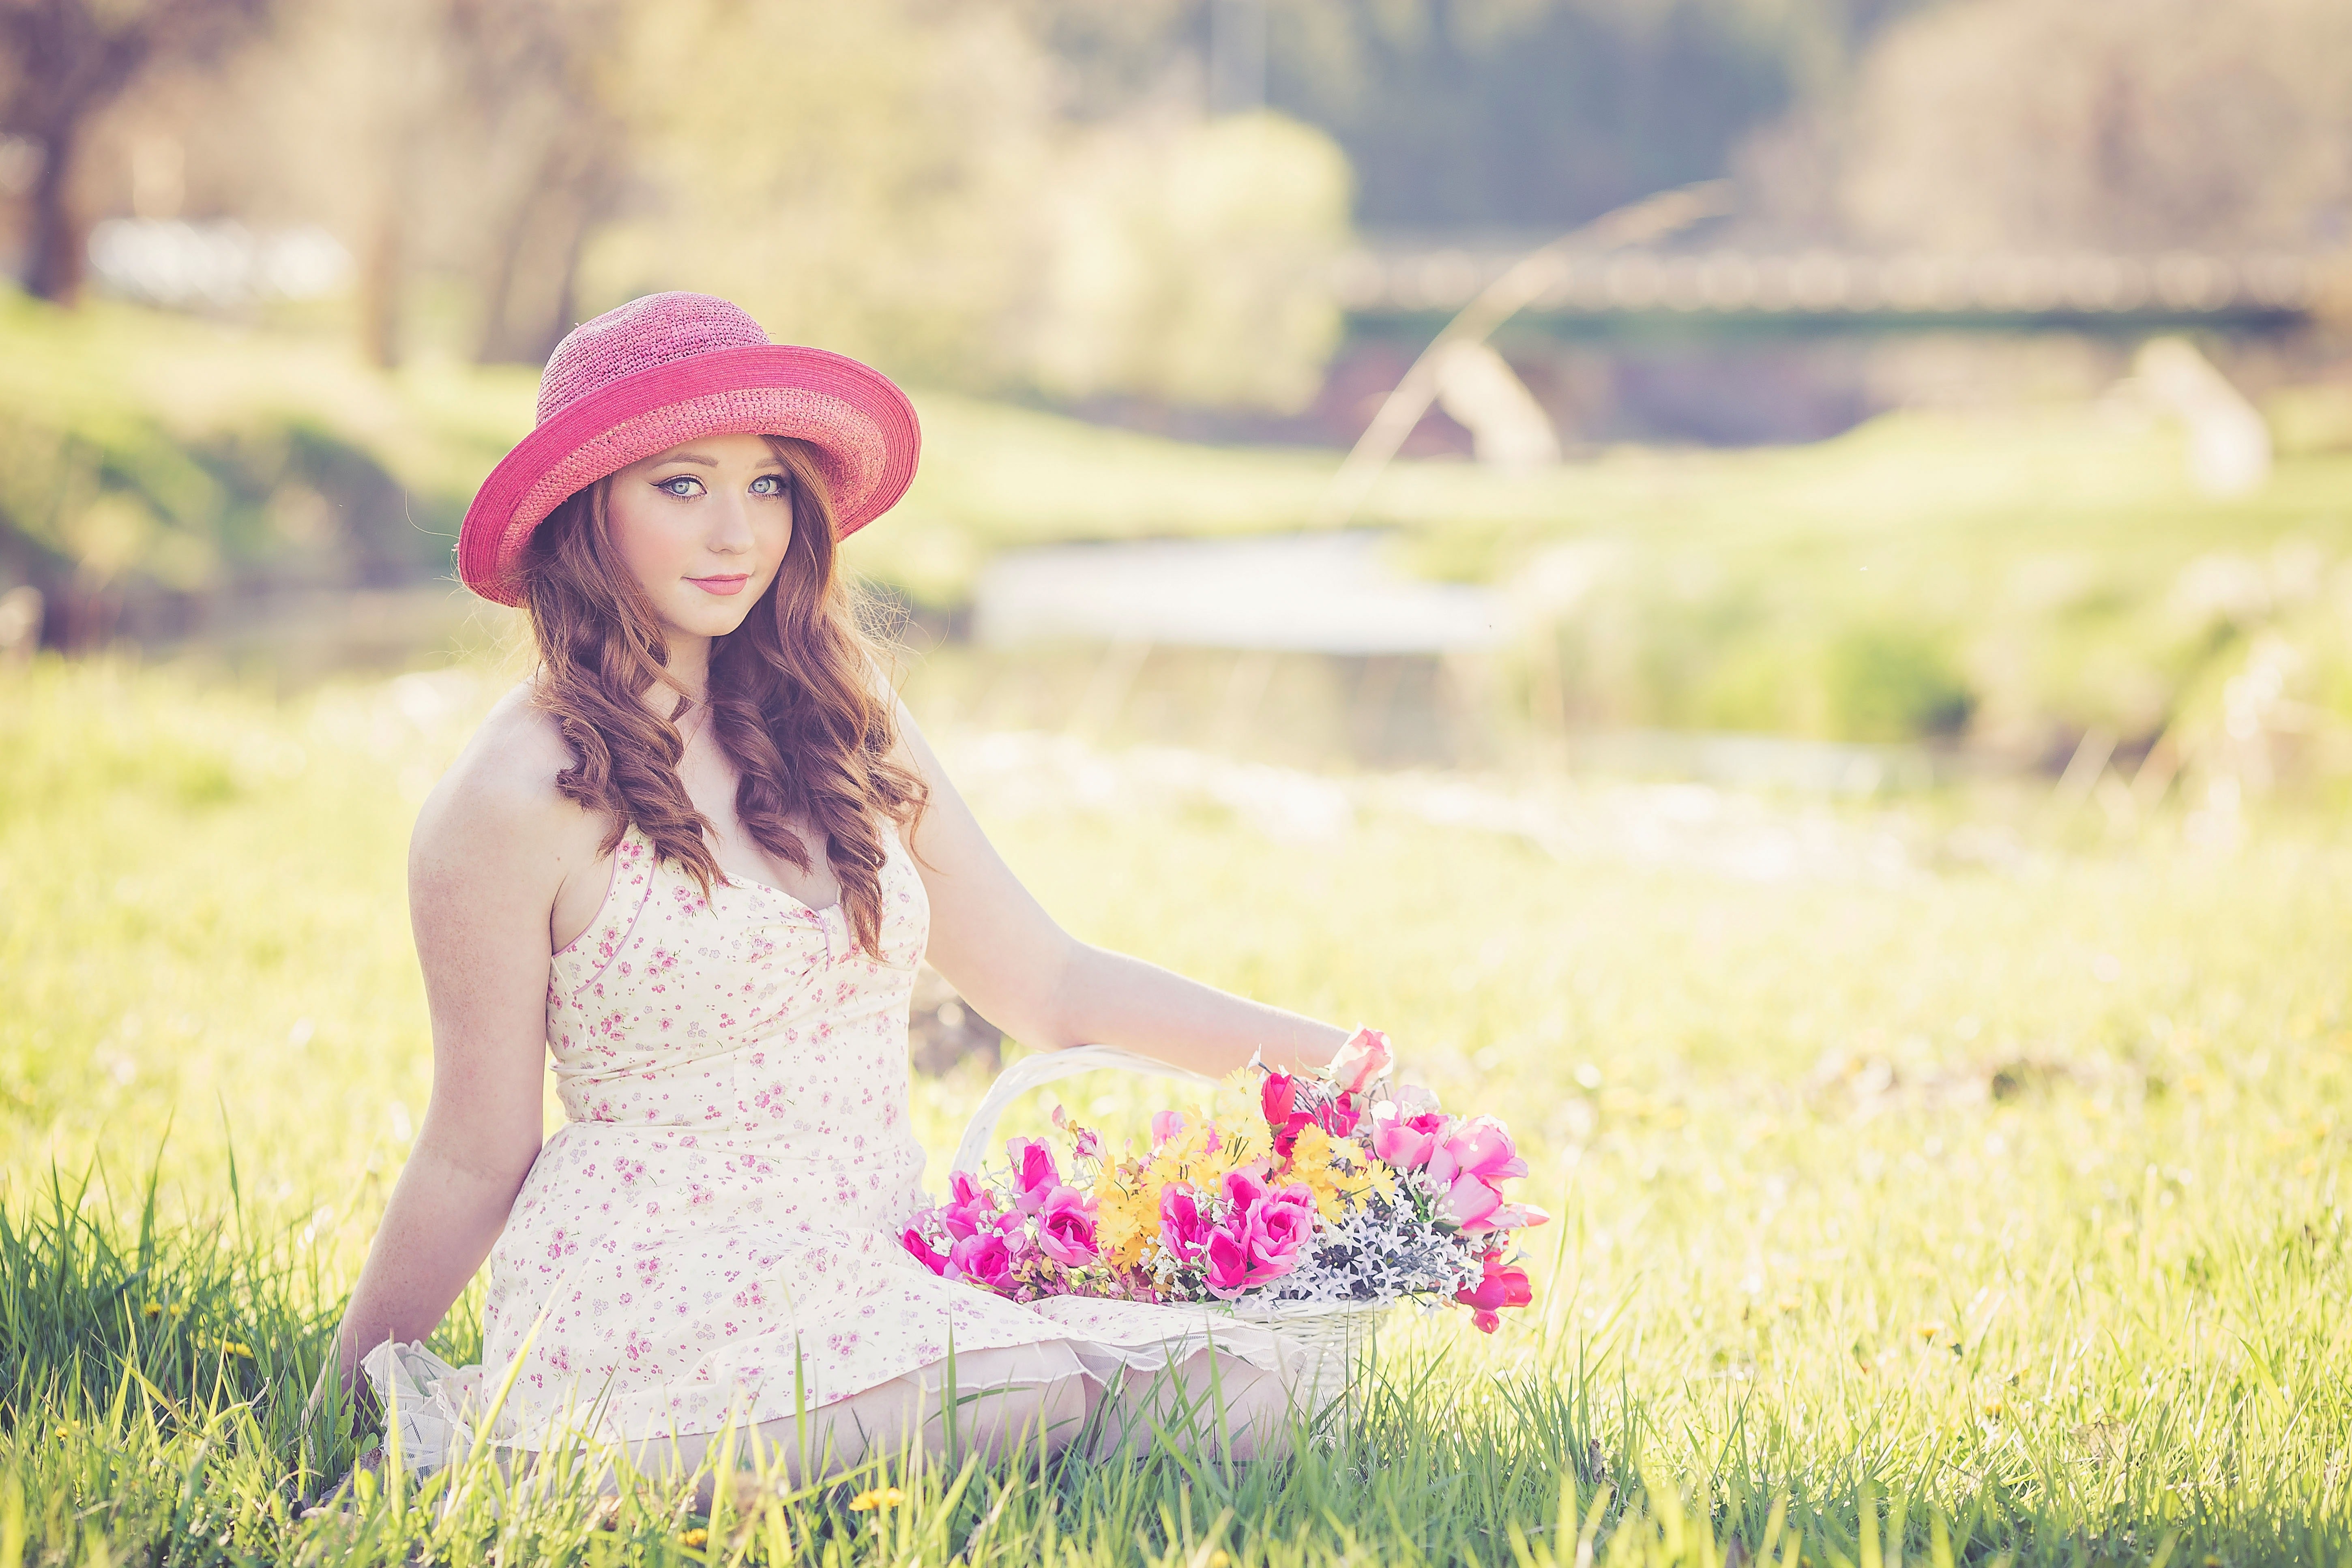 Portrait of a Beautiful Young Woman in Field, Artificial flowers, Photoshoot, Lady, Leisure, HQ Photo